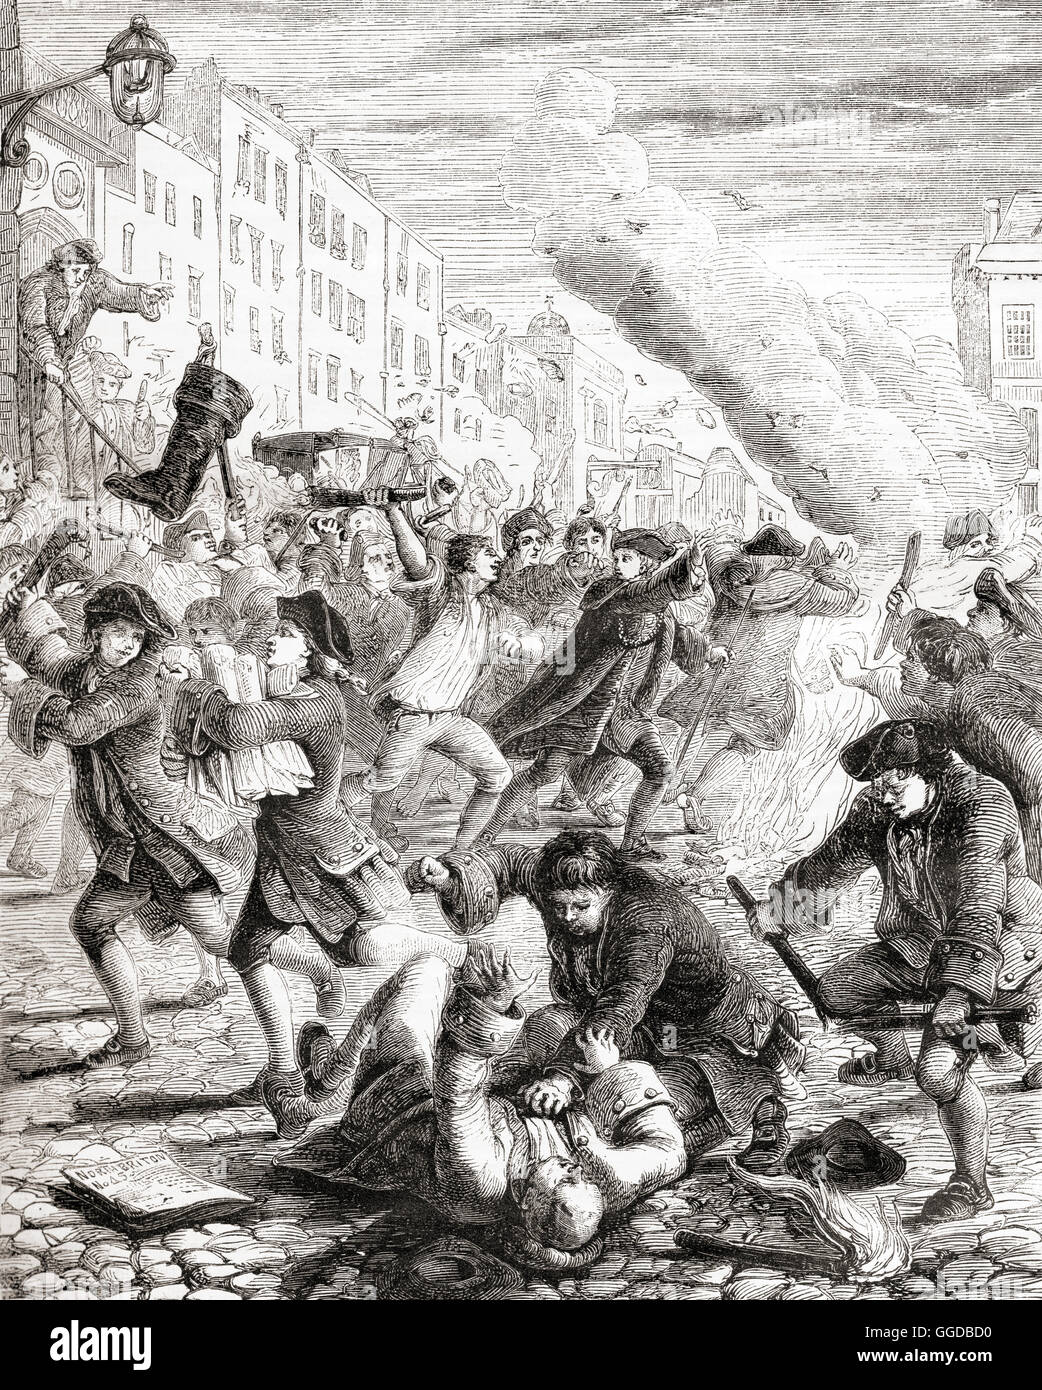 Riots in 1763 to stop the burning of issue No. 45 of The North Briton, a radical newspaper published in the 18th century, which had criticized a speech by King George III which supported the Treaty of Paris. Stock Photo